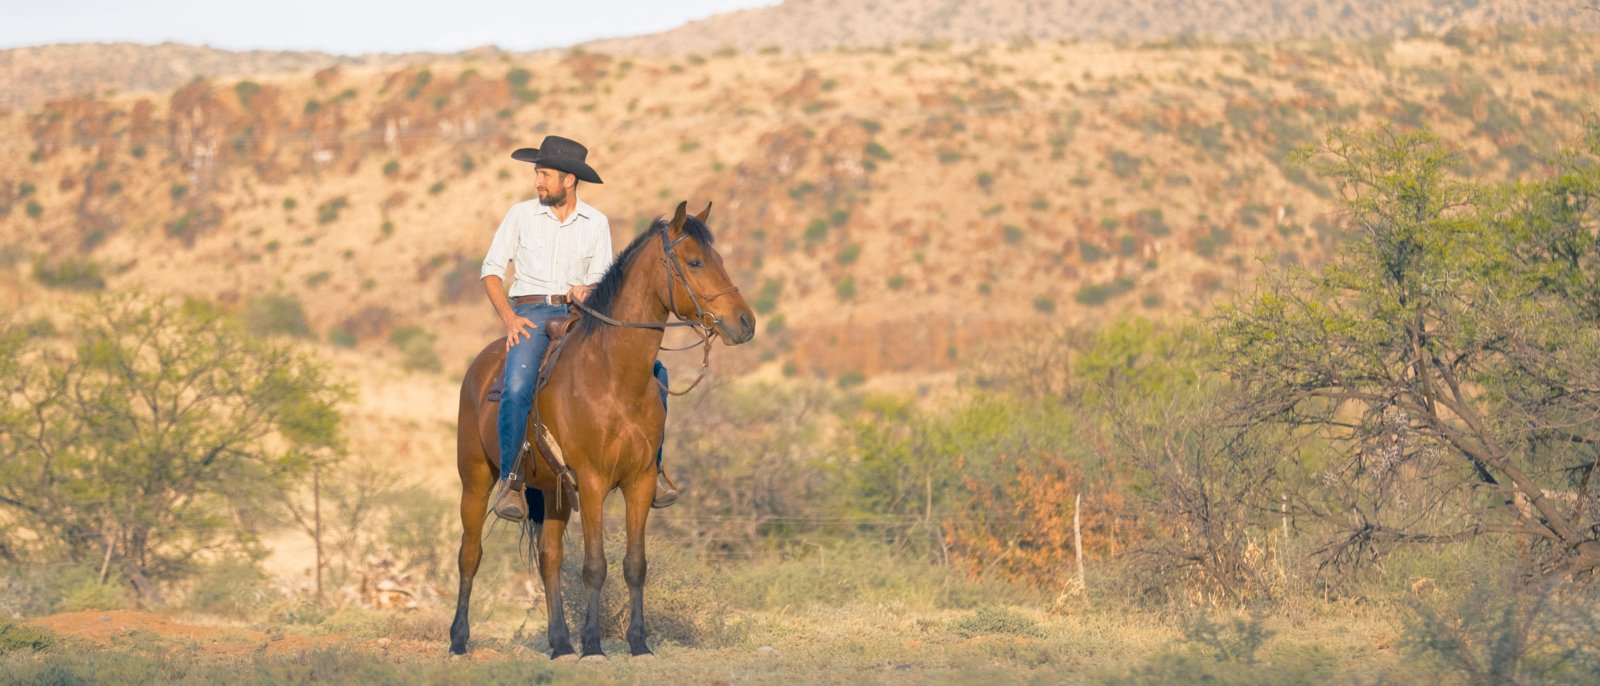 A Karoo farmer rides his horse on the lookout for cows